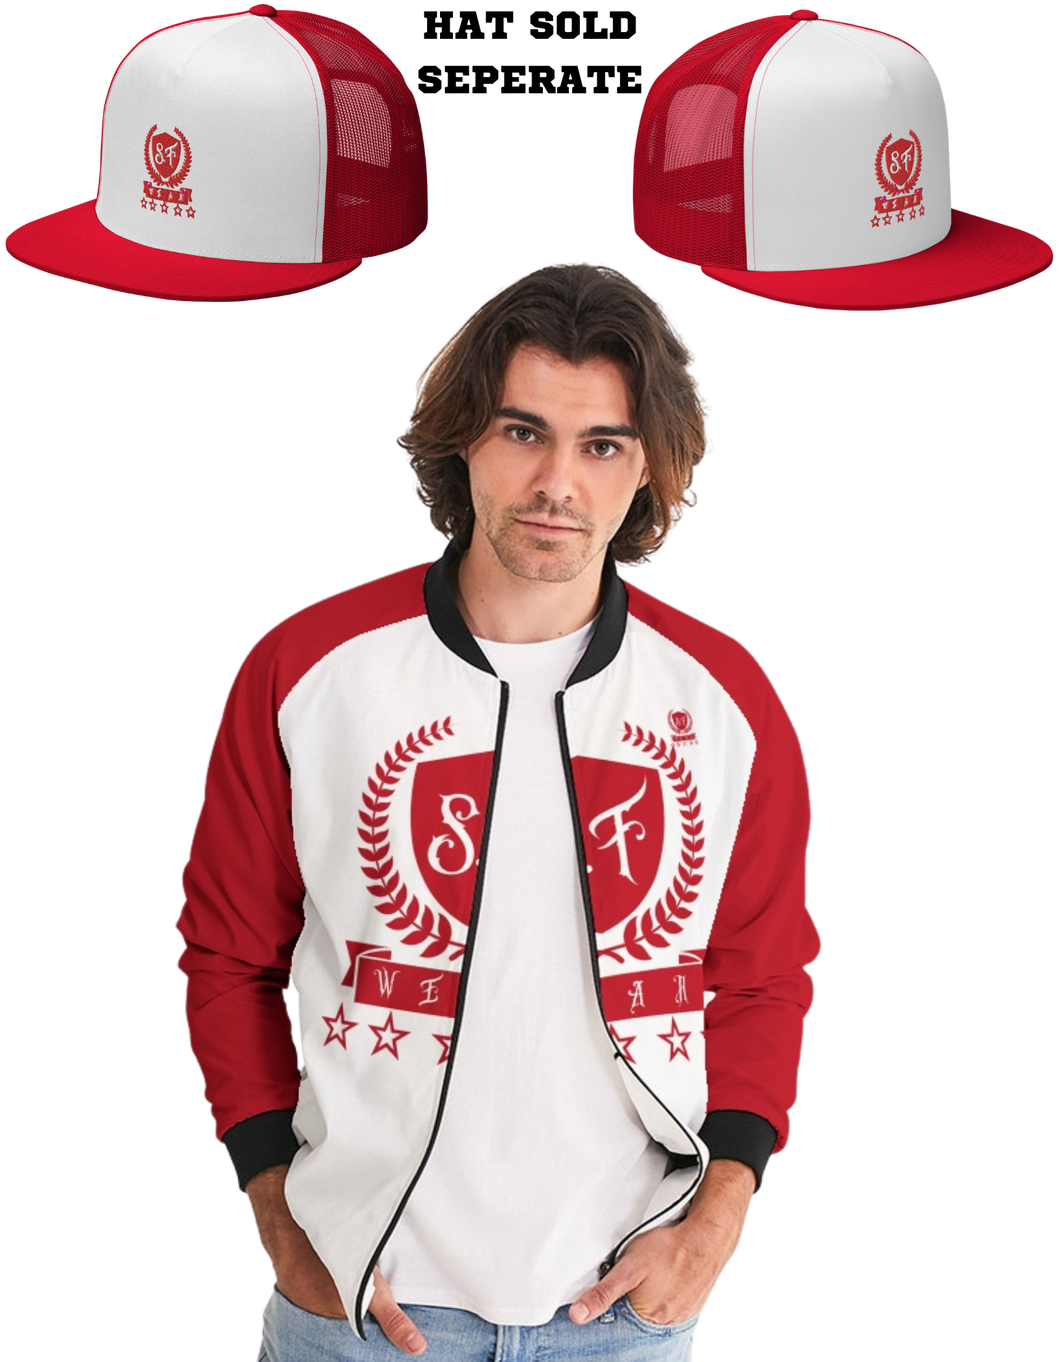 SF WEAR 1 JACKET - RED/WHITE Men's All-Over Print Bomber Jacket